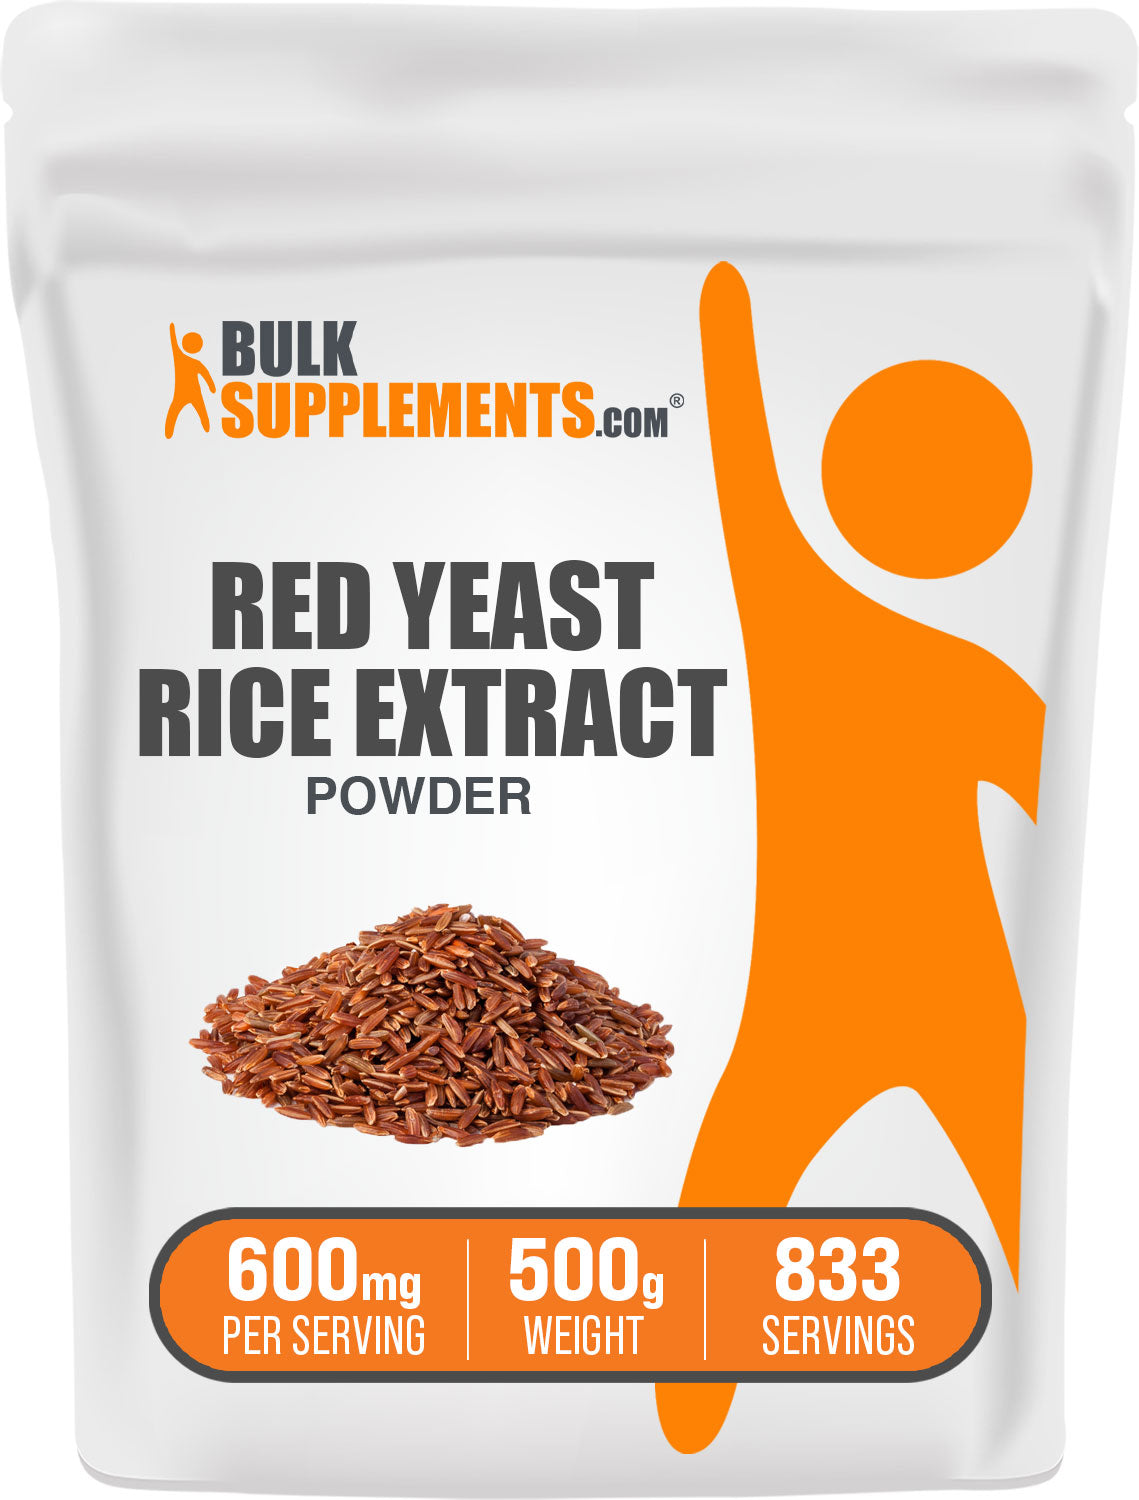 BulkSupplements Red Yeast Rice Extract Powder 500g bag